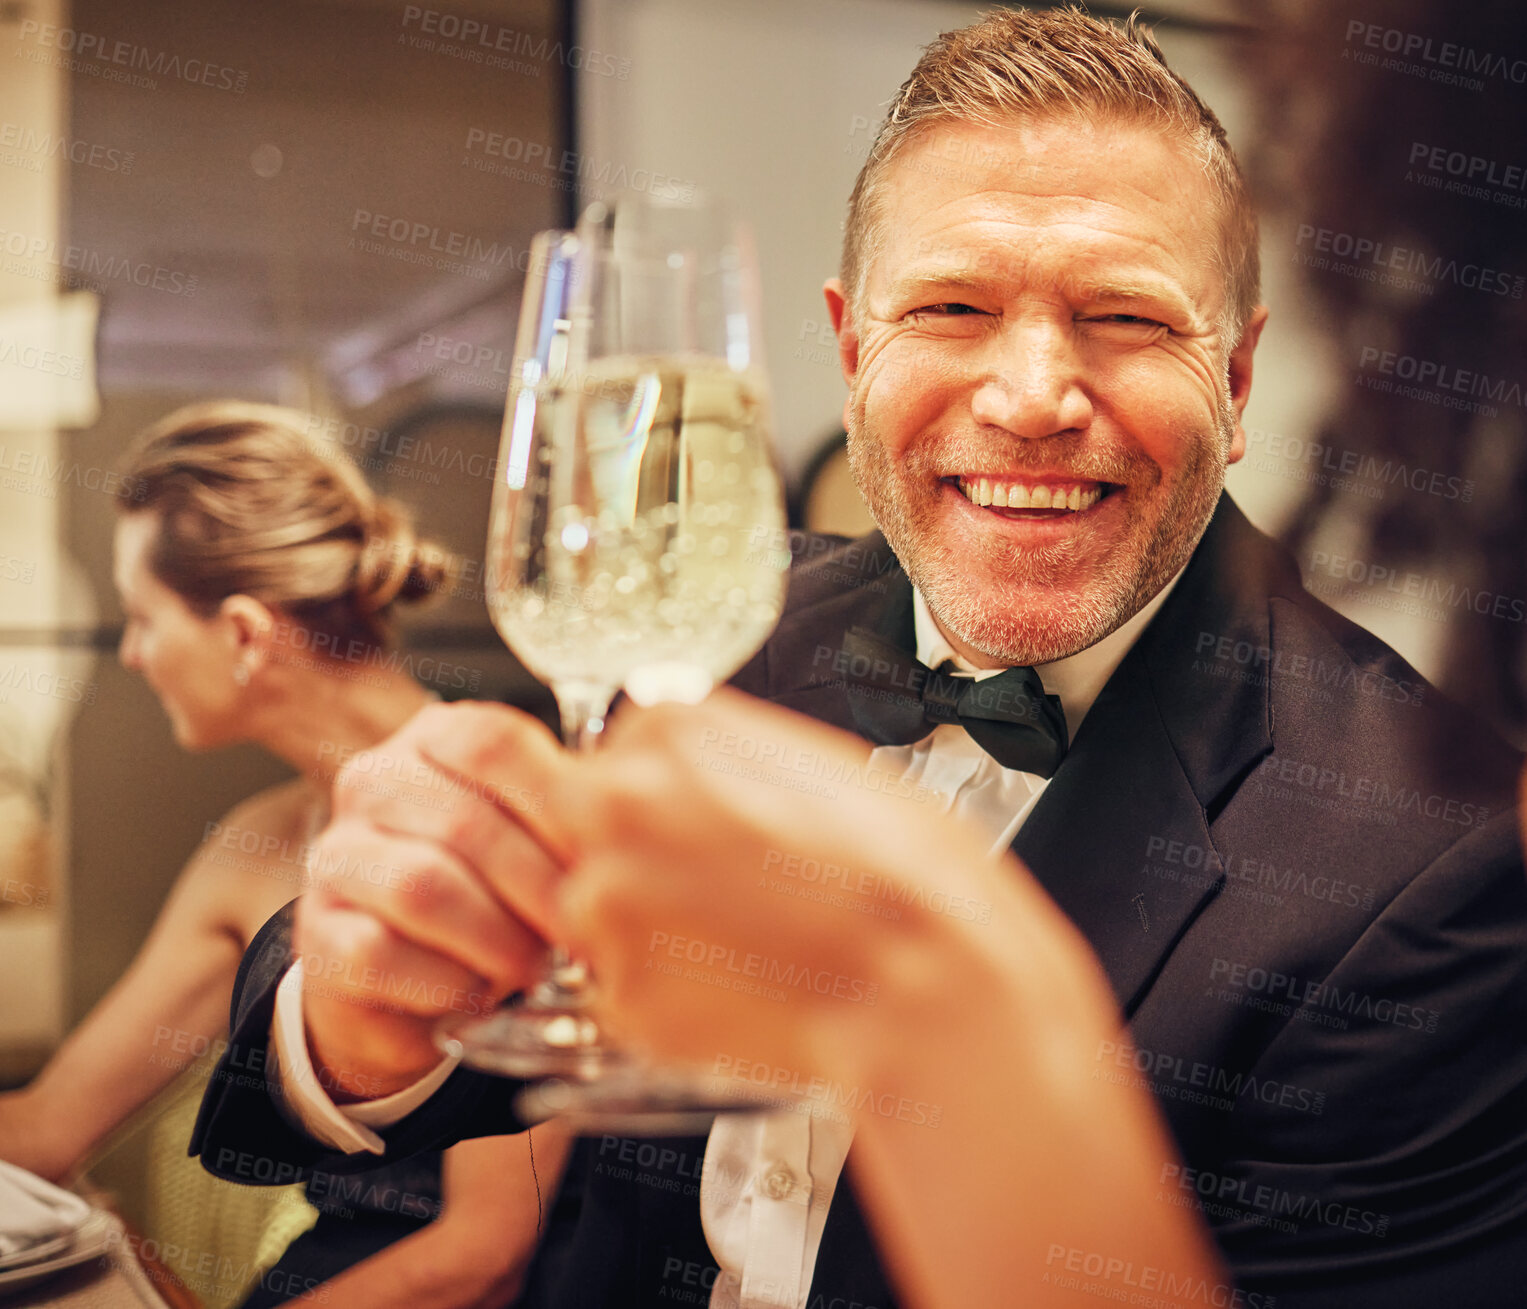 Buy stock photo Champagne, cheers celebrate and party with man in suit, smile on face at formal luxury event. Success, bubbly wine and happy people celebration of achievement or birthday, toast with glass of bubbles